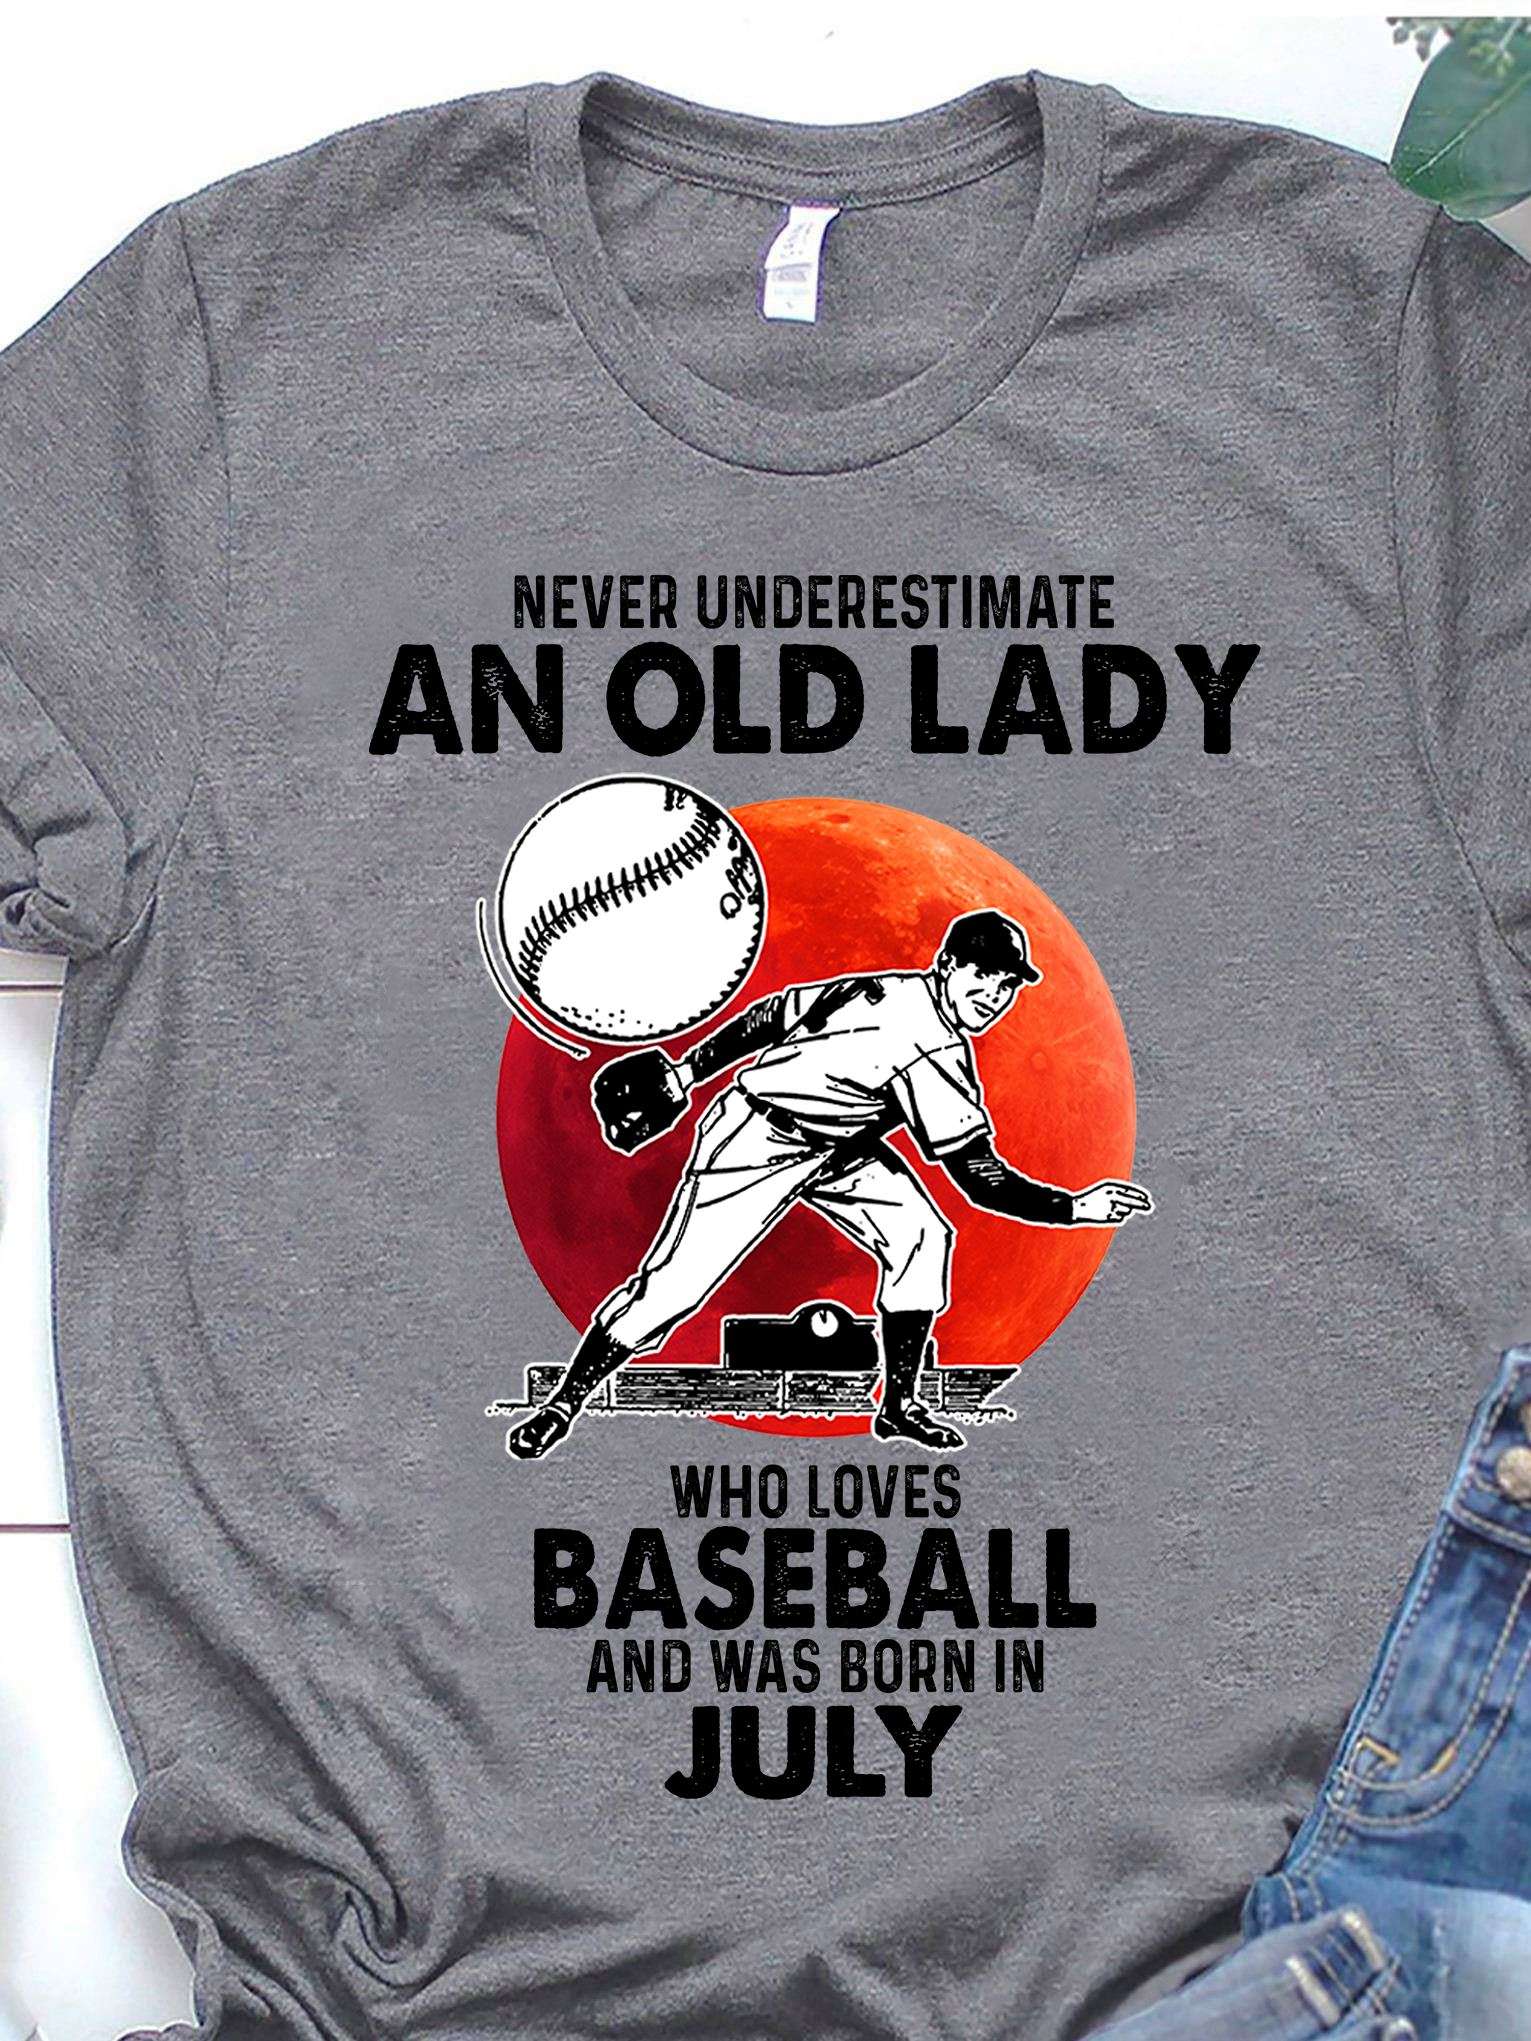 Never underestimate an old lady who loves baseball and was born in July